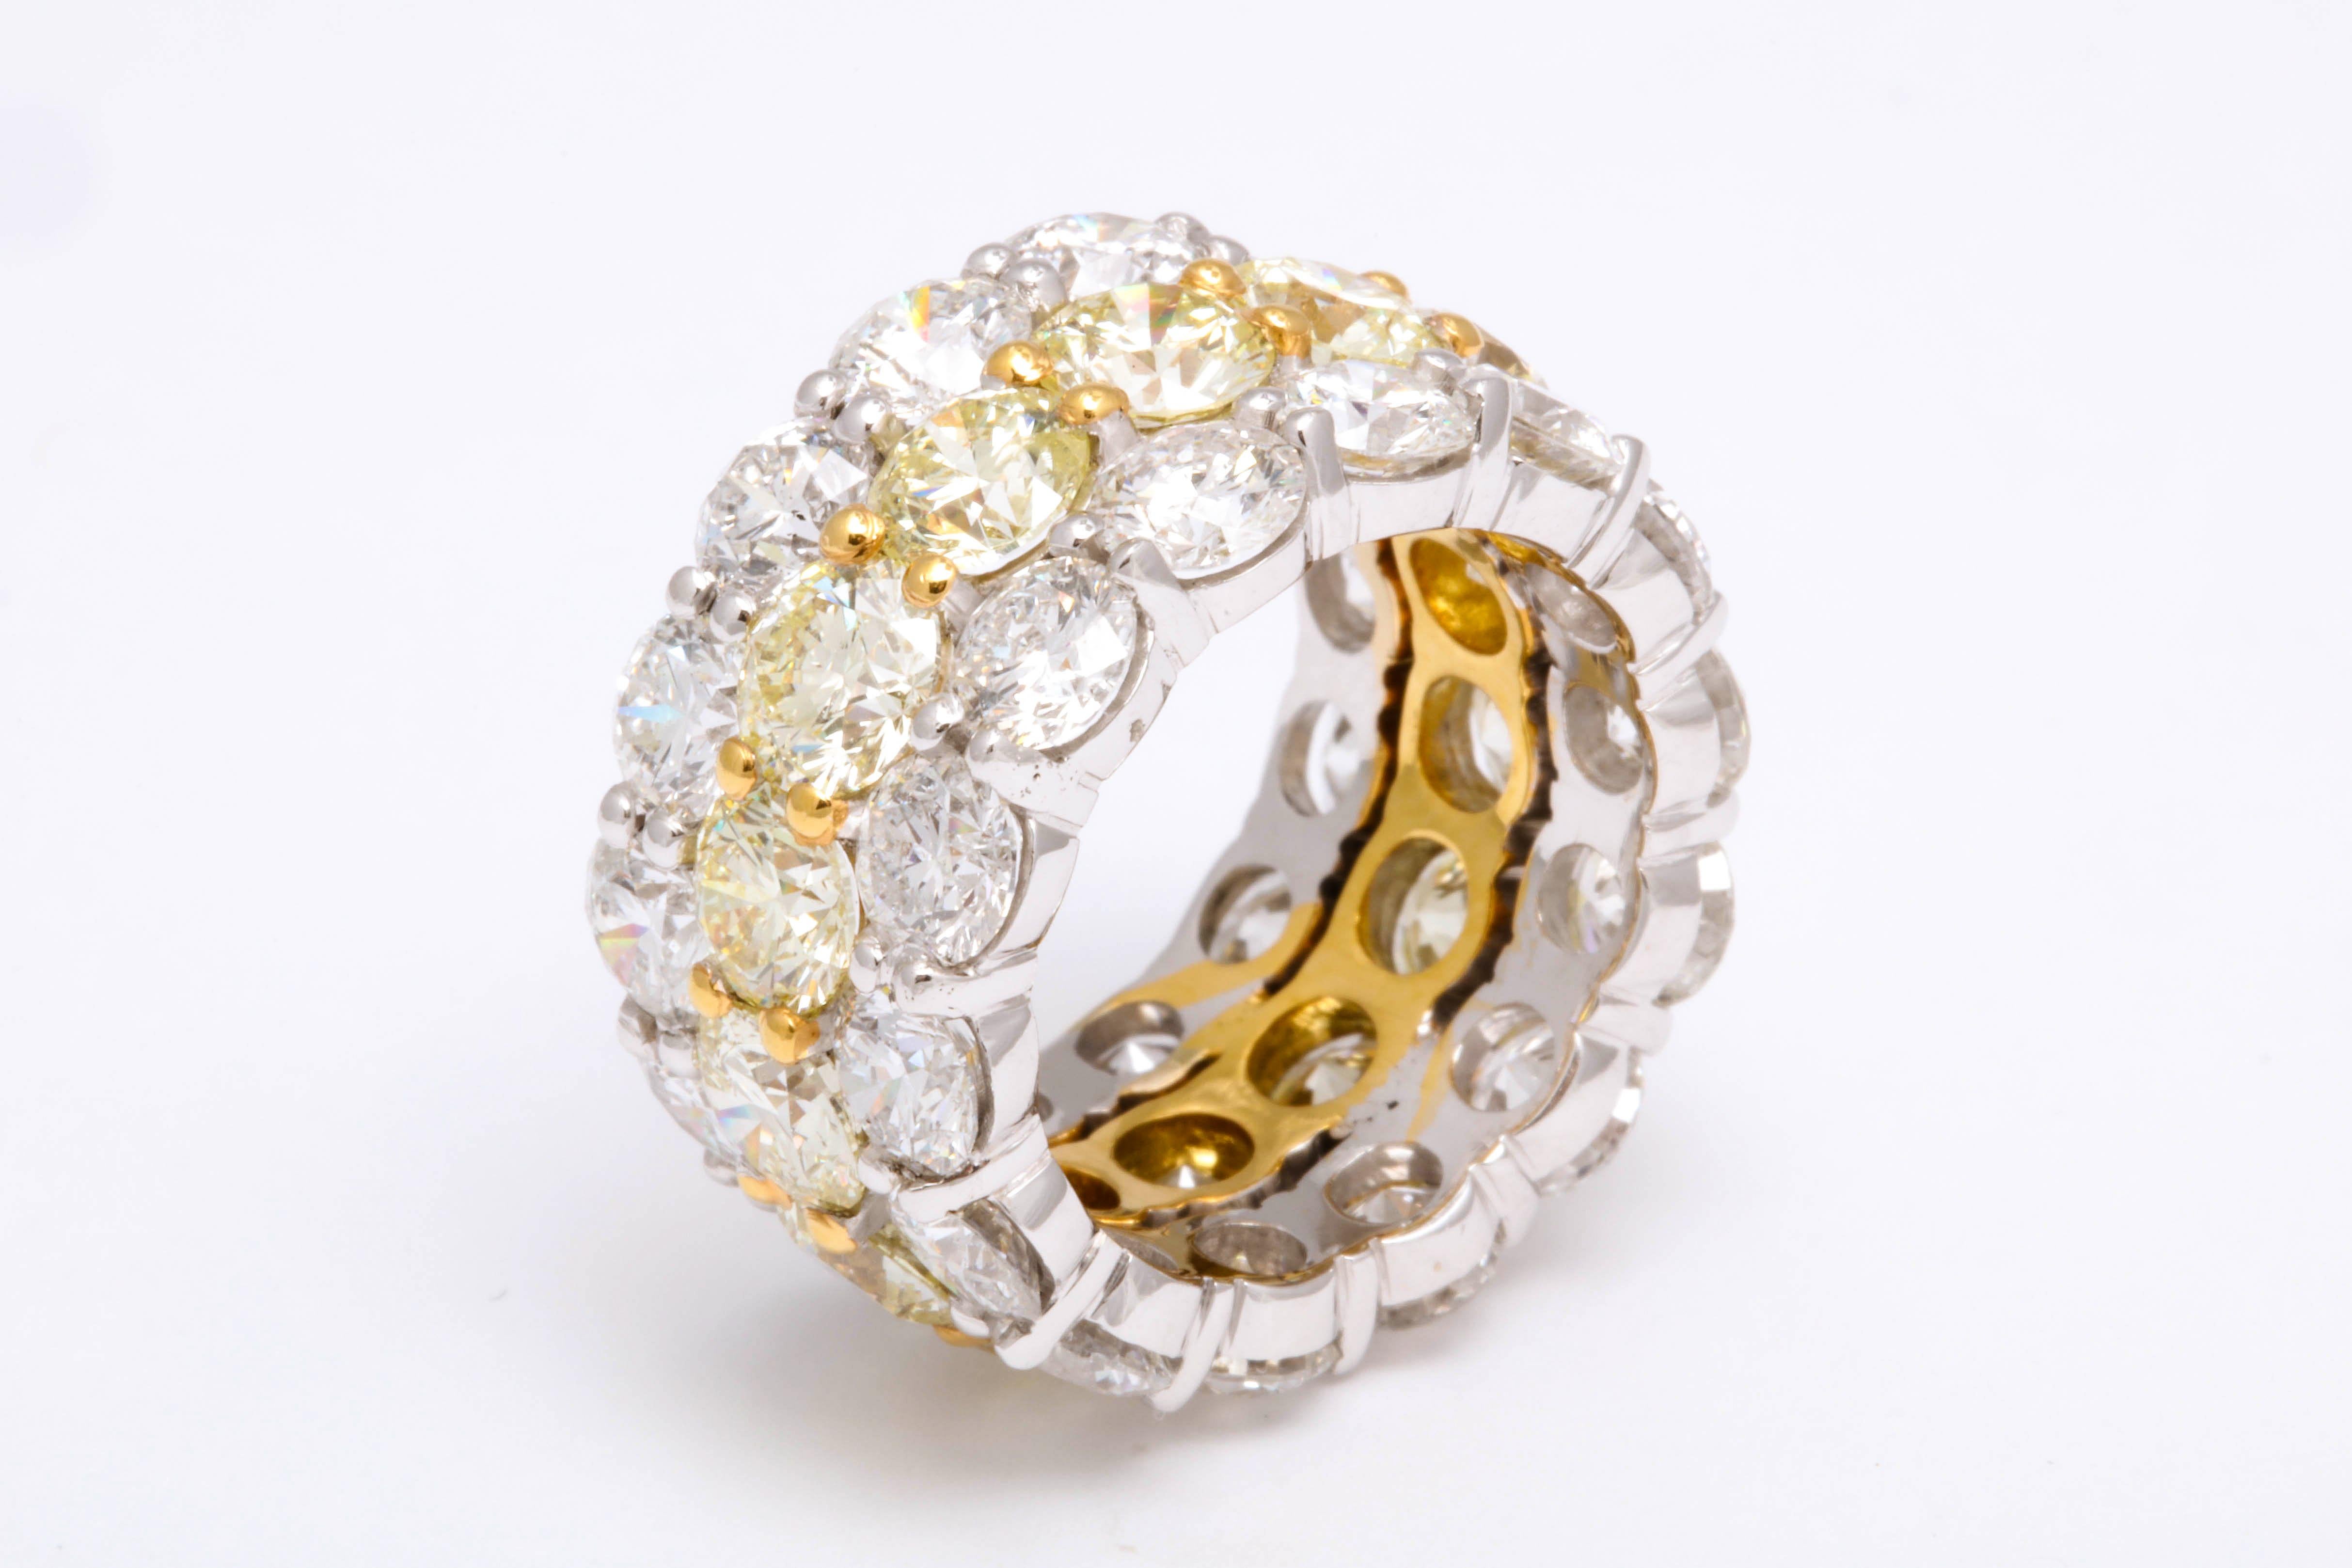 
Over 17 carats of diamonds! A beautiful wide band, full of sparkle!

7.40 carats of light yellow round brilliant cut diamonds set in the center, a total of 9.90 carats of white round brilliant cut diamonds set on each side.

Approximately 12.7 mm